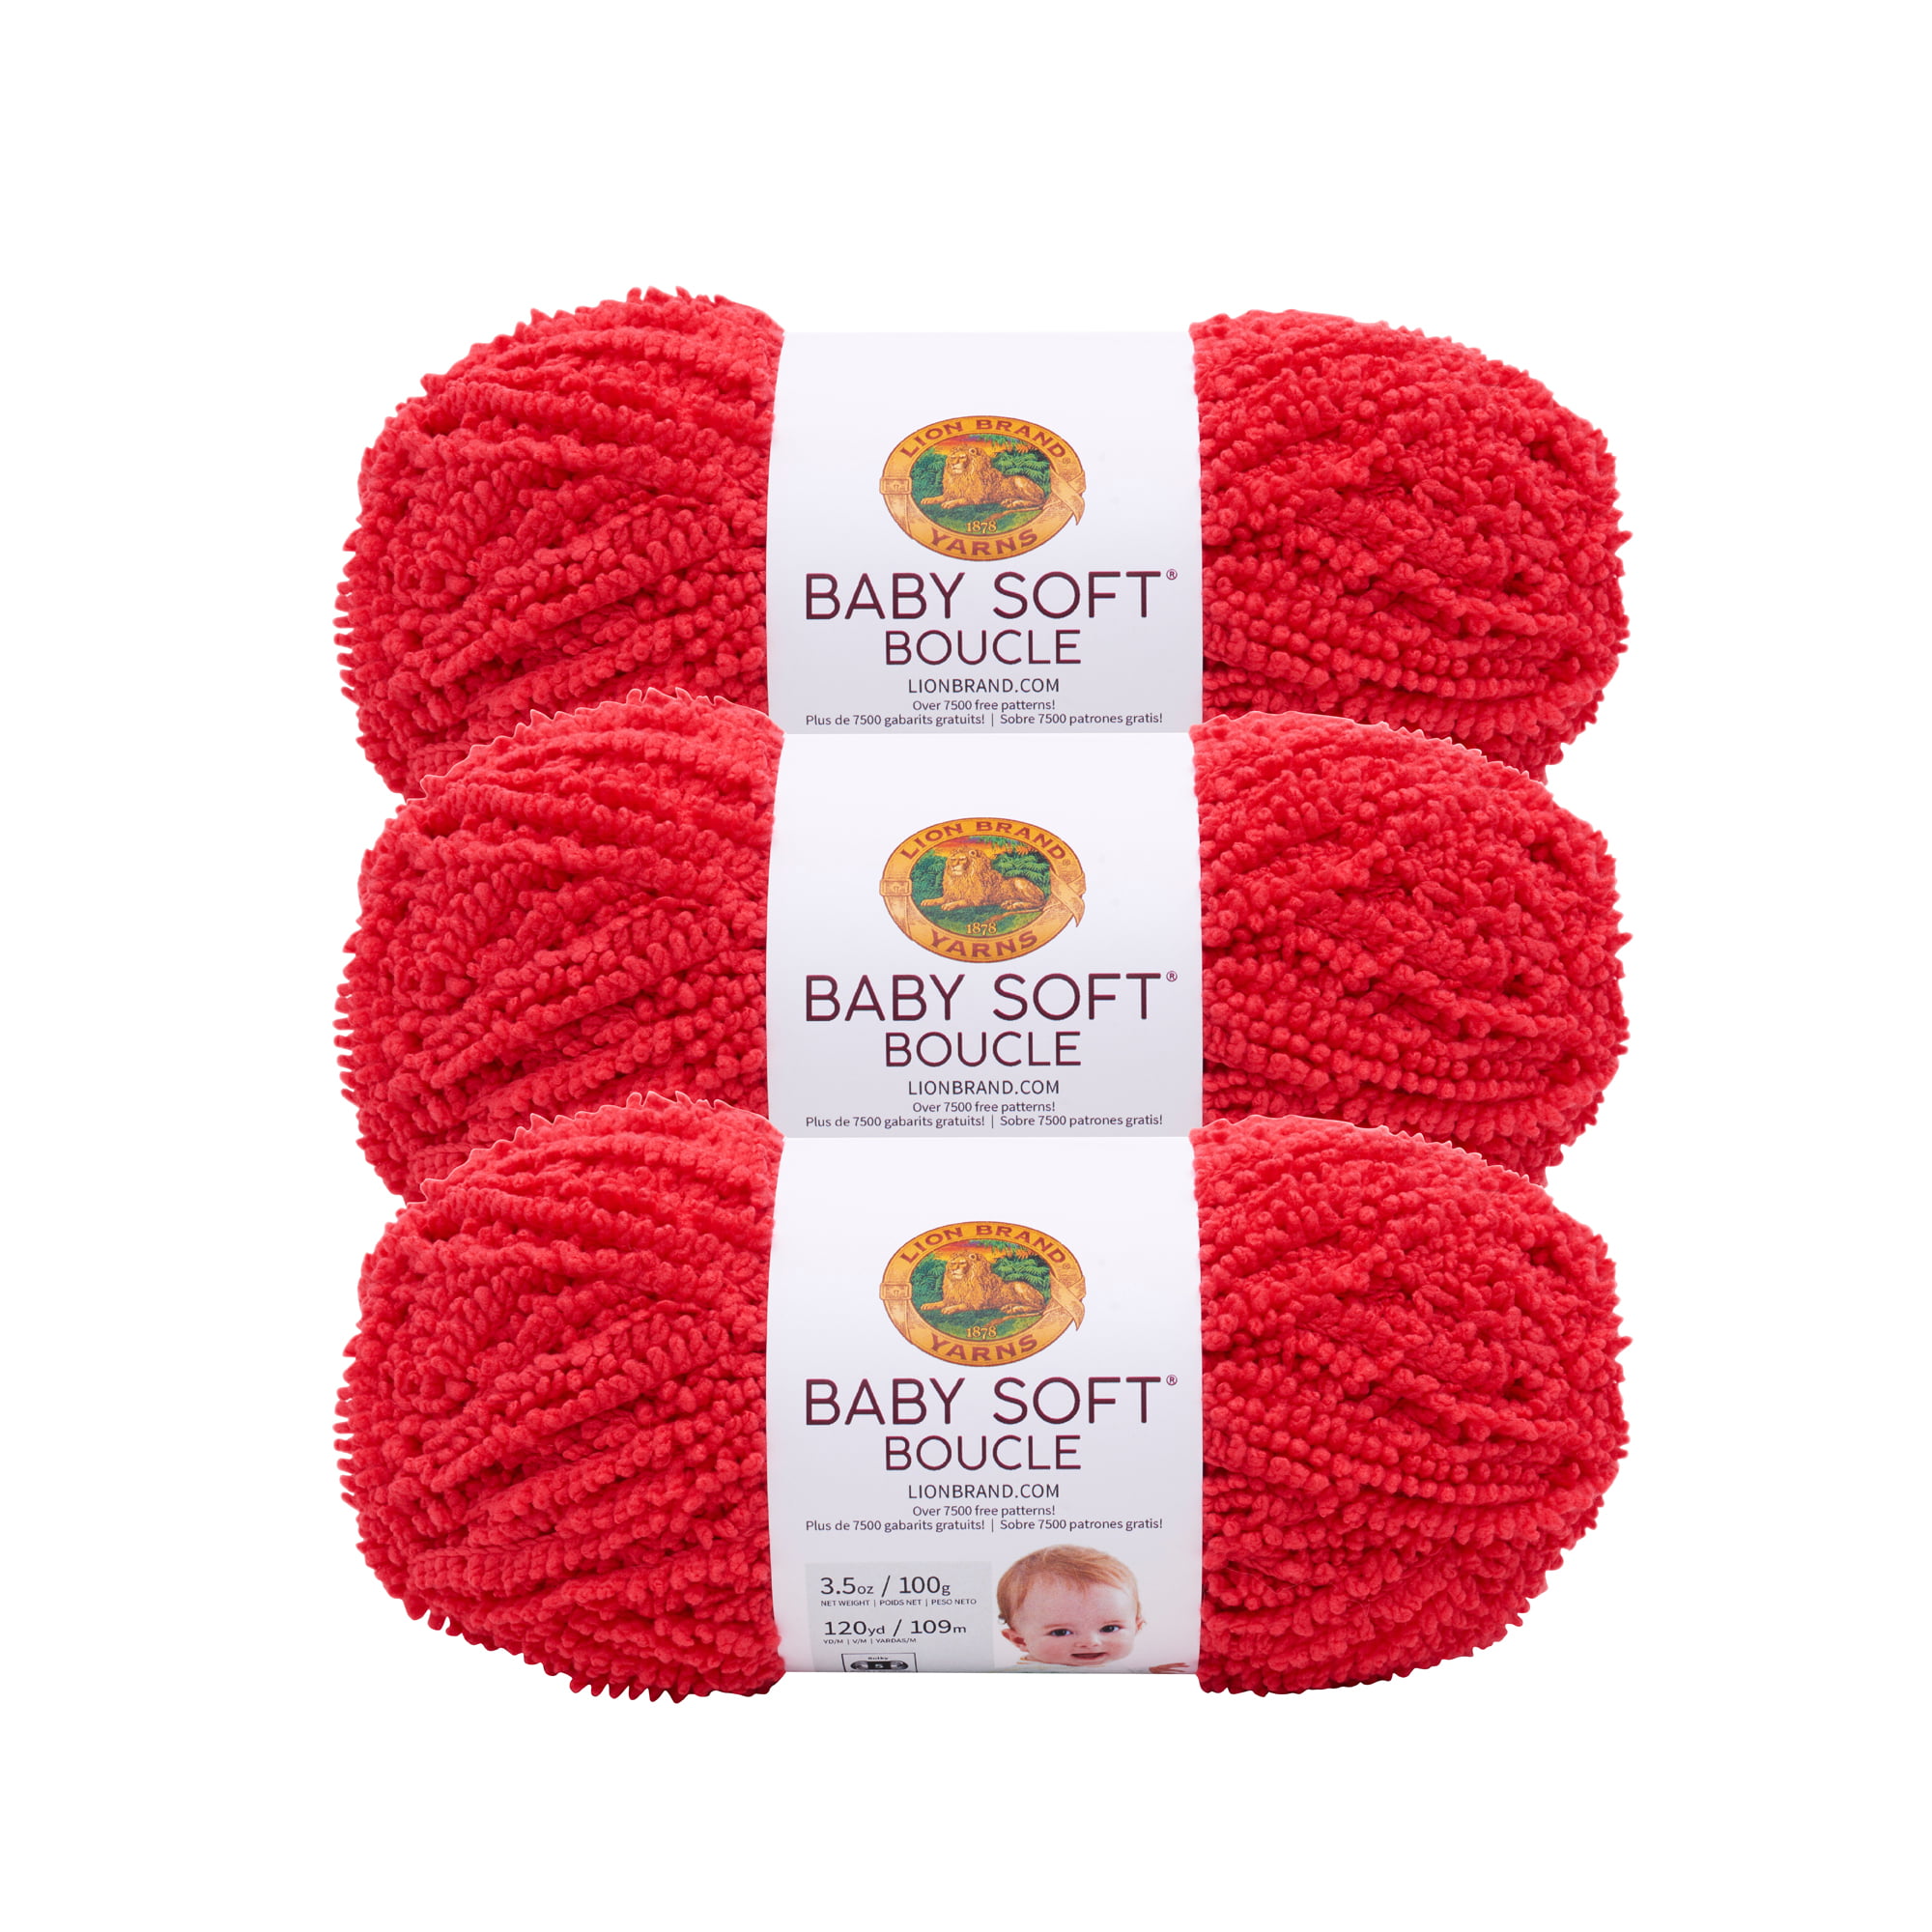 Lion Brand Yarn Baby Soft Boucle Scarlet Boucle Baby Bulky Polyester Red  Yarn 3 Pack